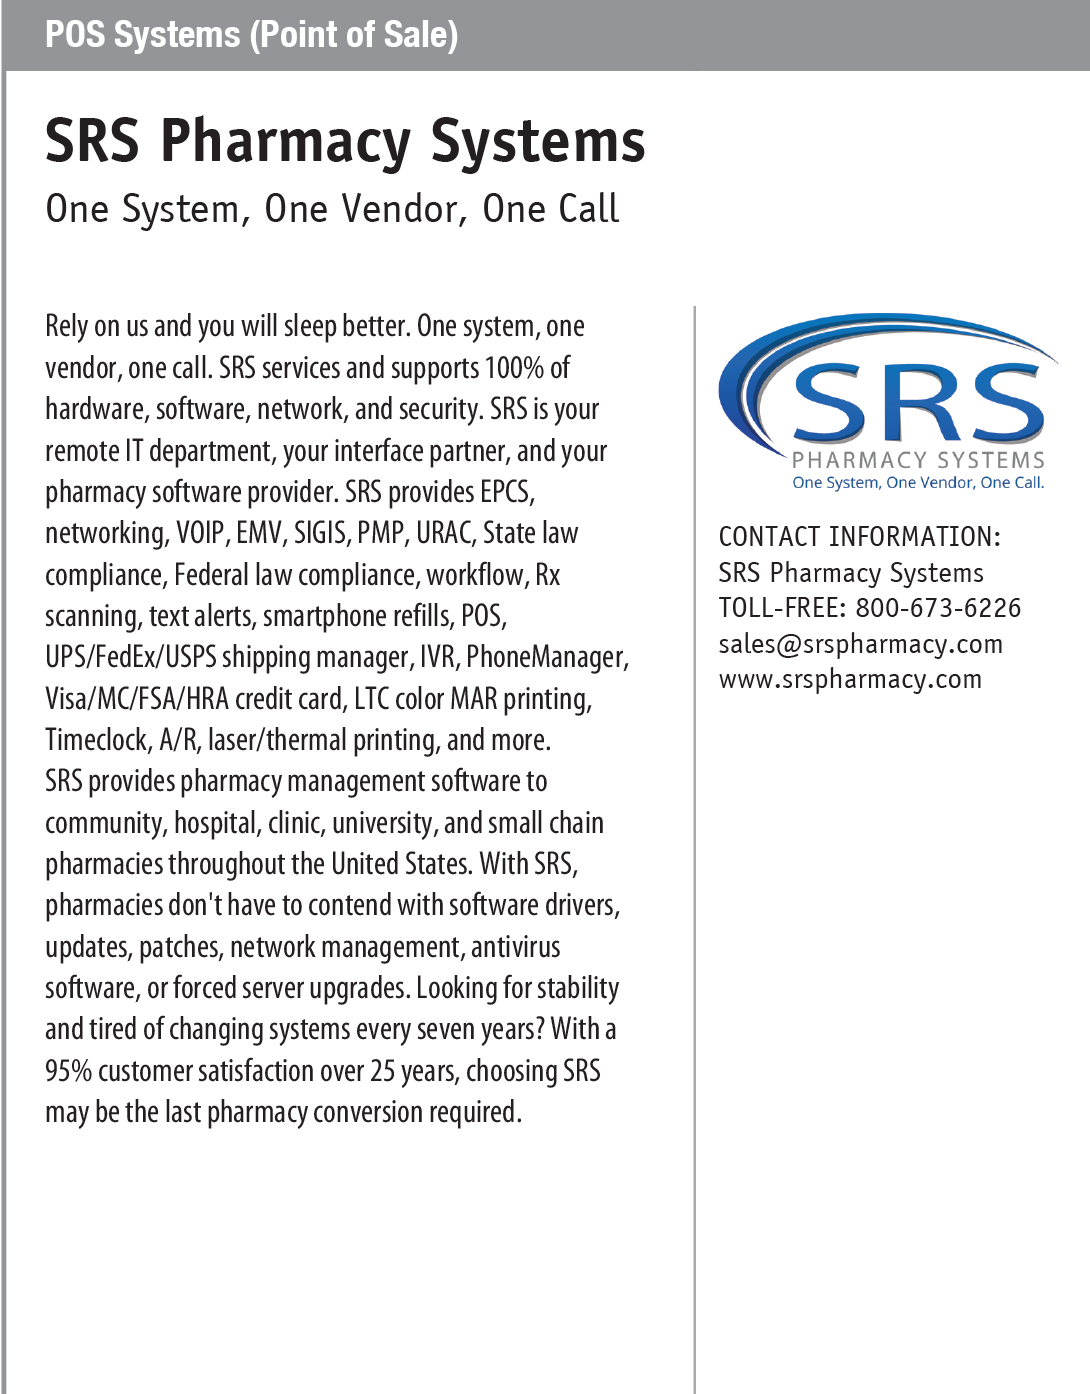 PROFILE_POS-Systems-(Point-of-Sale)---SRS-Pharmacy-Systems.jpg